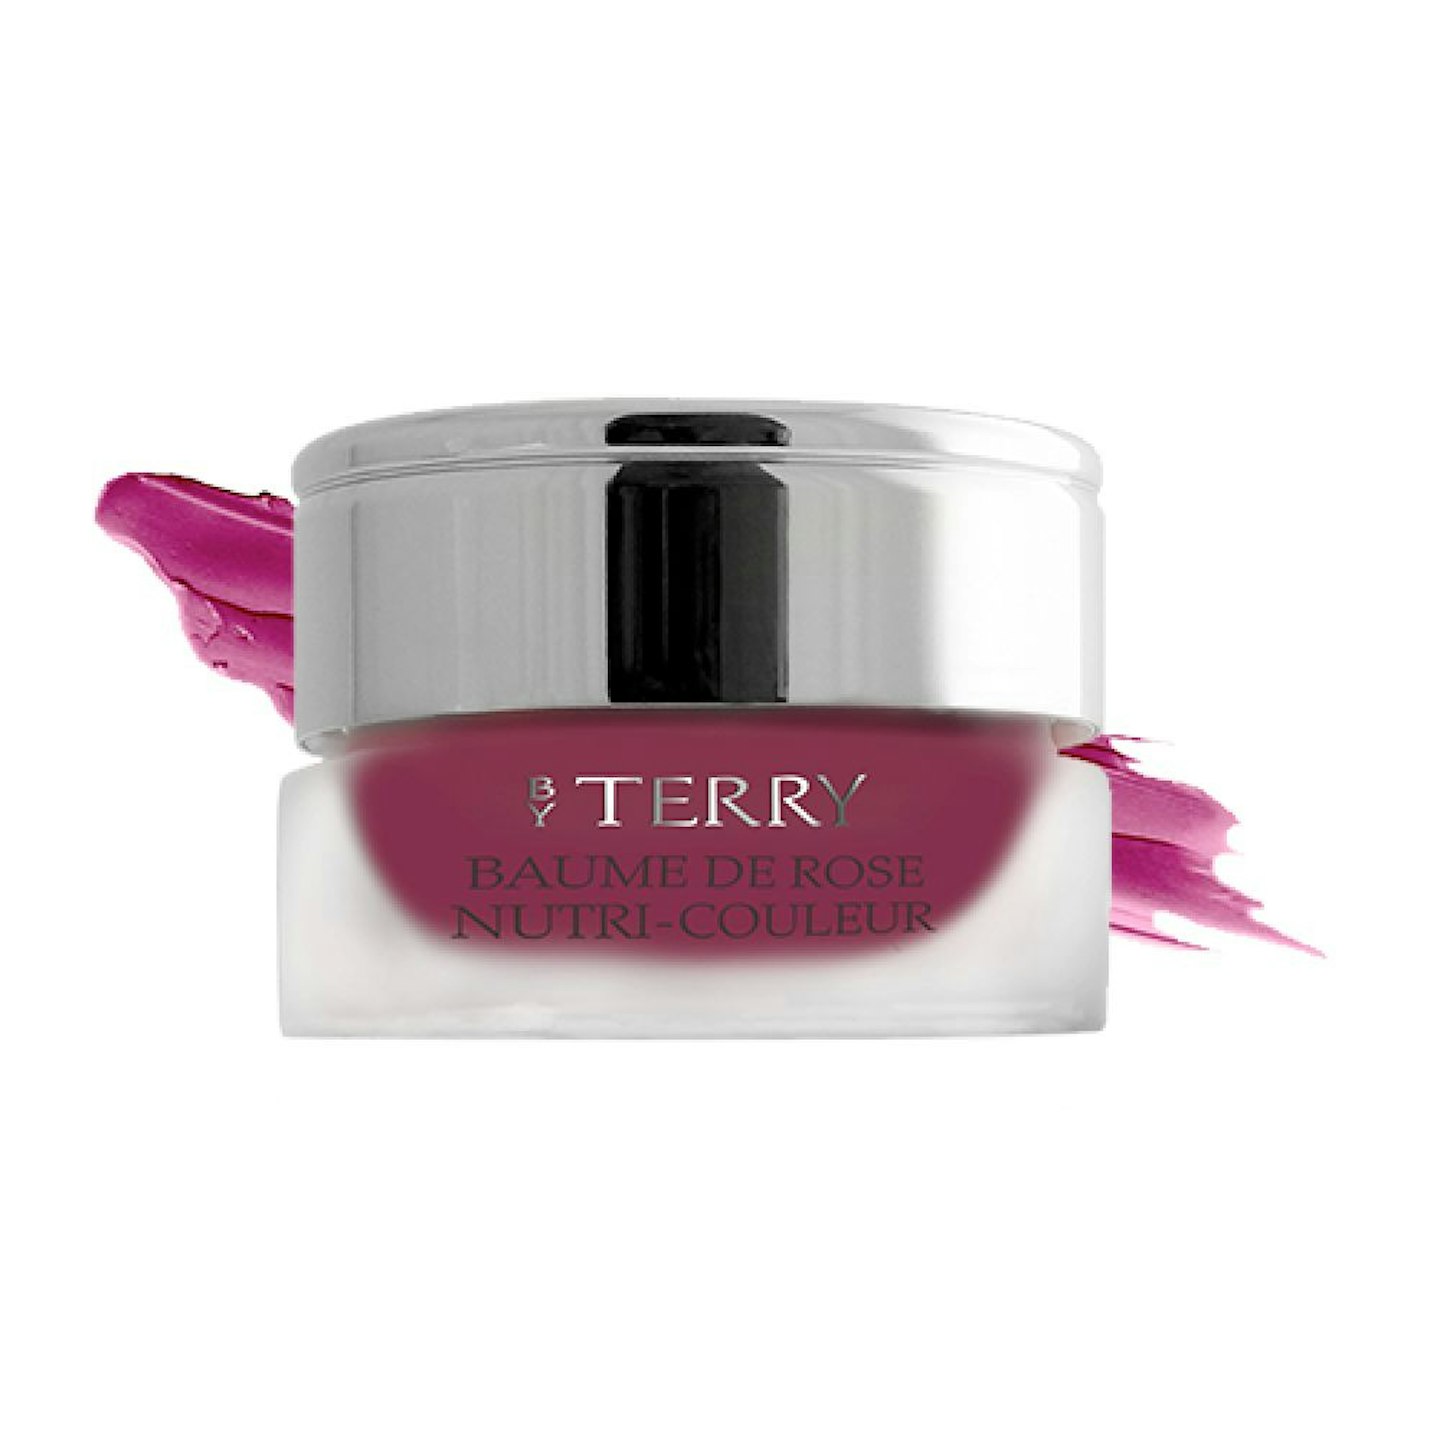 BY TERRY Baume de Rose nutri- couleur lip balm in Fig Fiction, £36